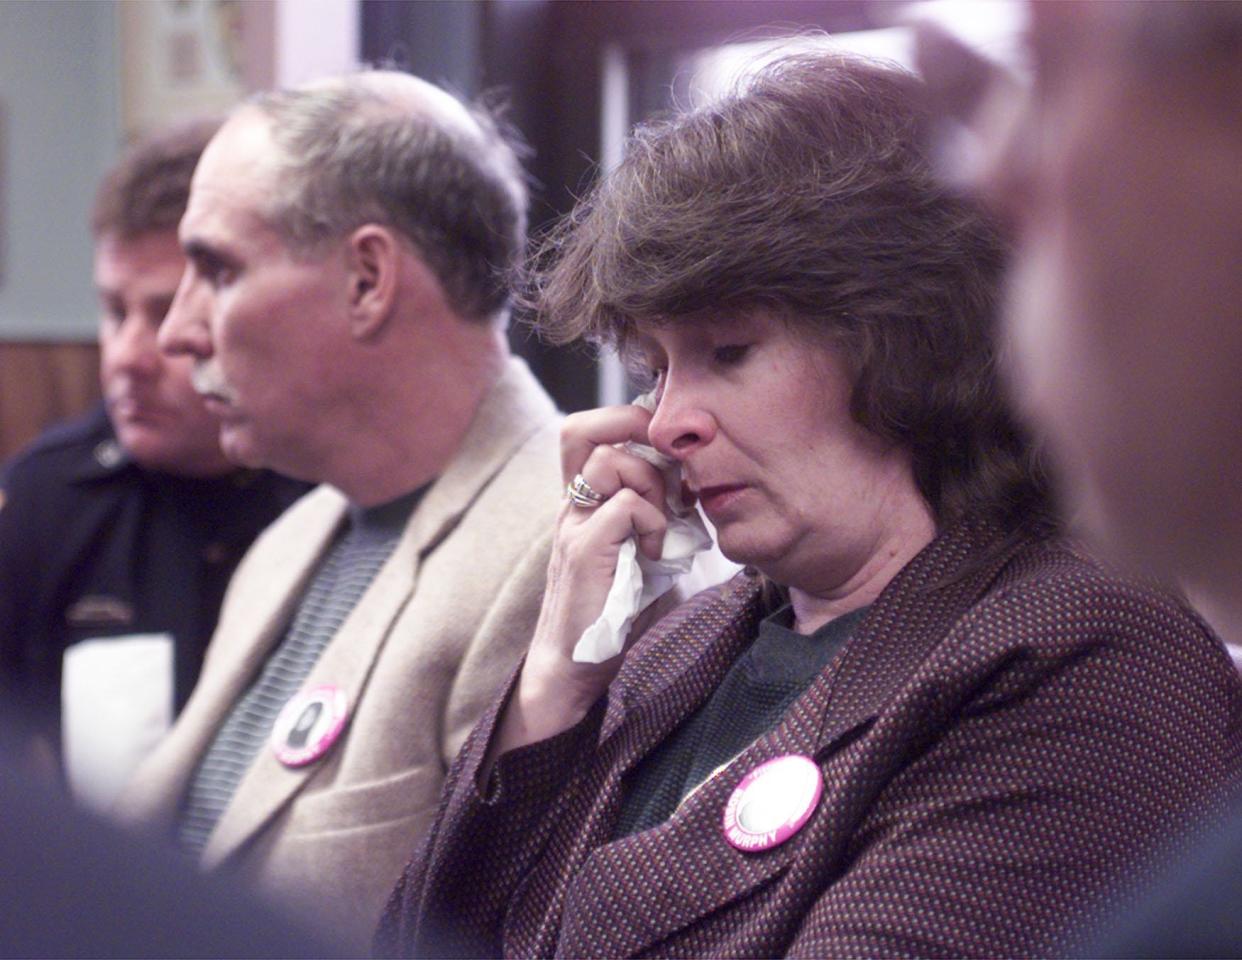 Judith Murphy, mother of Robin Murphy, wipes a tear from her eye during a press conference at the Putnam County Office Building on April 9, 1999. The county was still determined to find the woman after four years. At left is husband Brian Murphy.